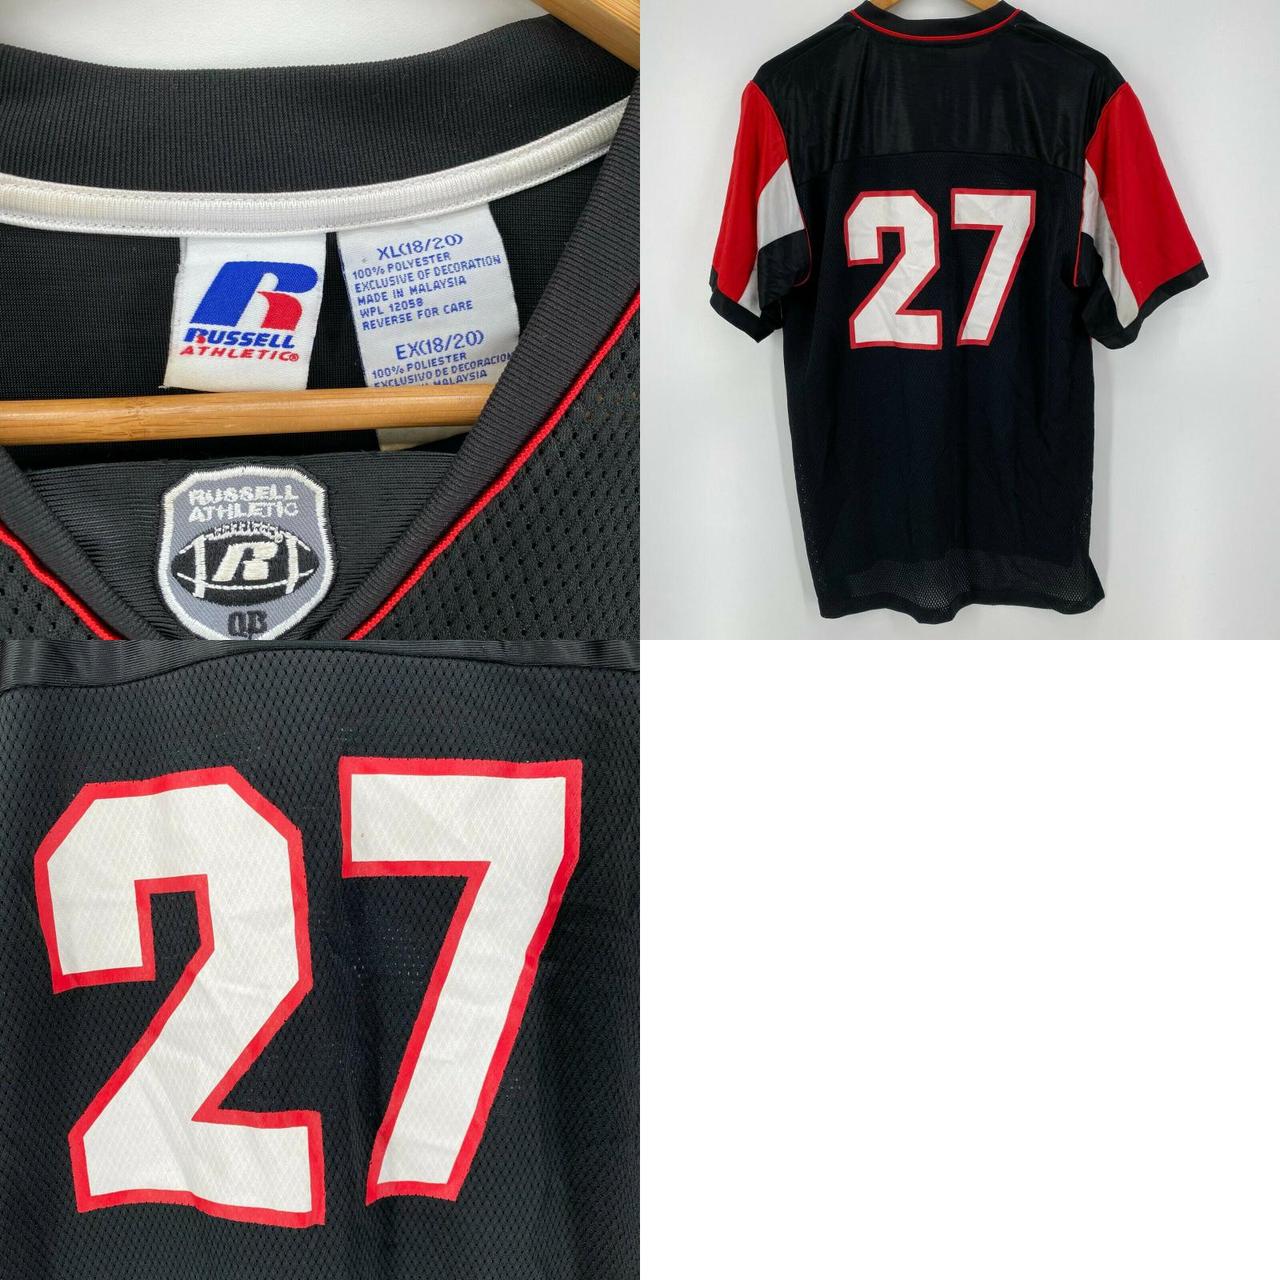 Russell Athletic Football Jersey Youth XL Black Red #27 Retro Vintage